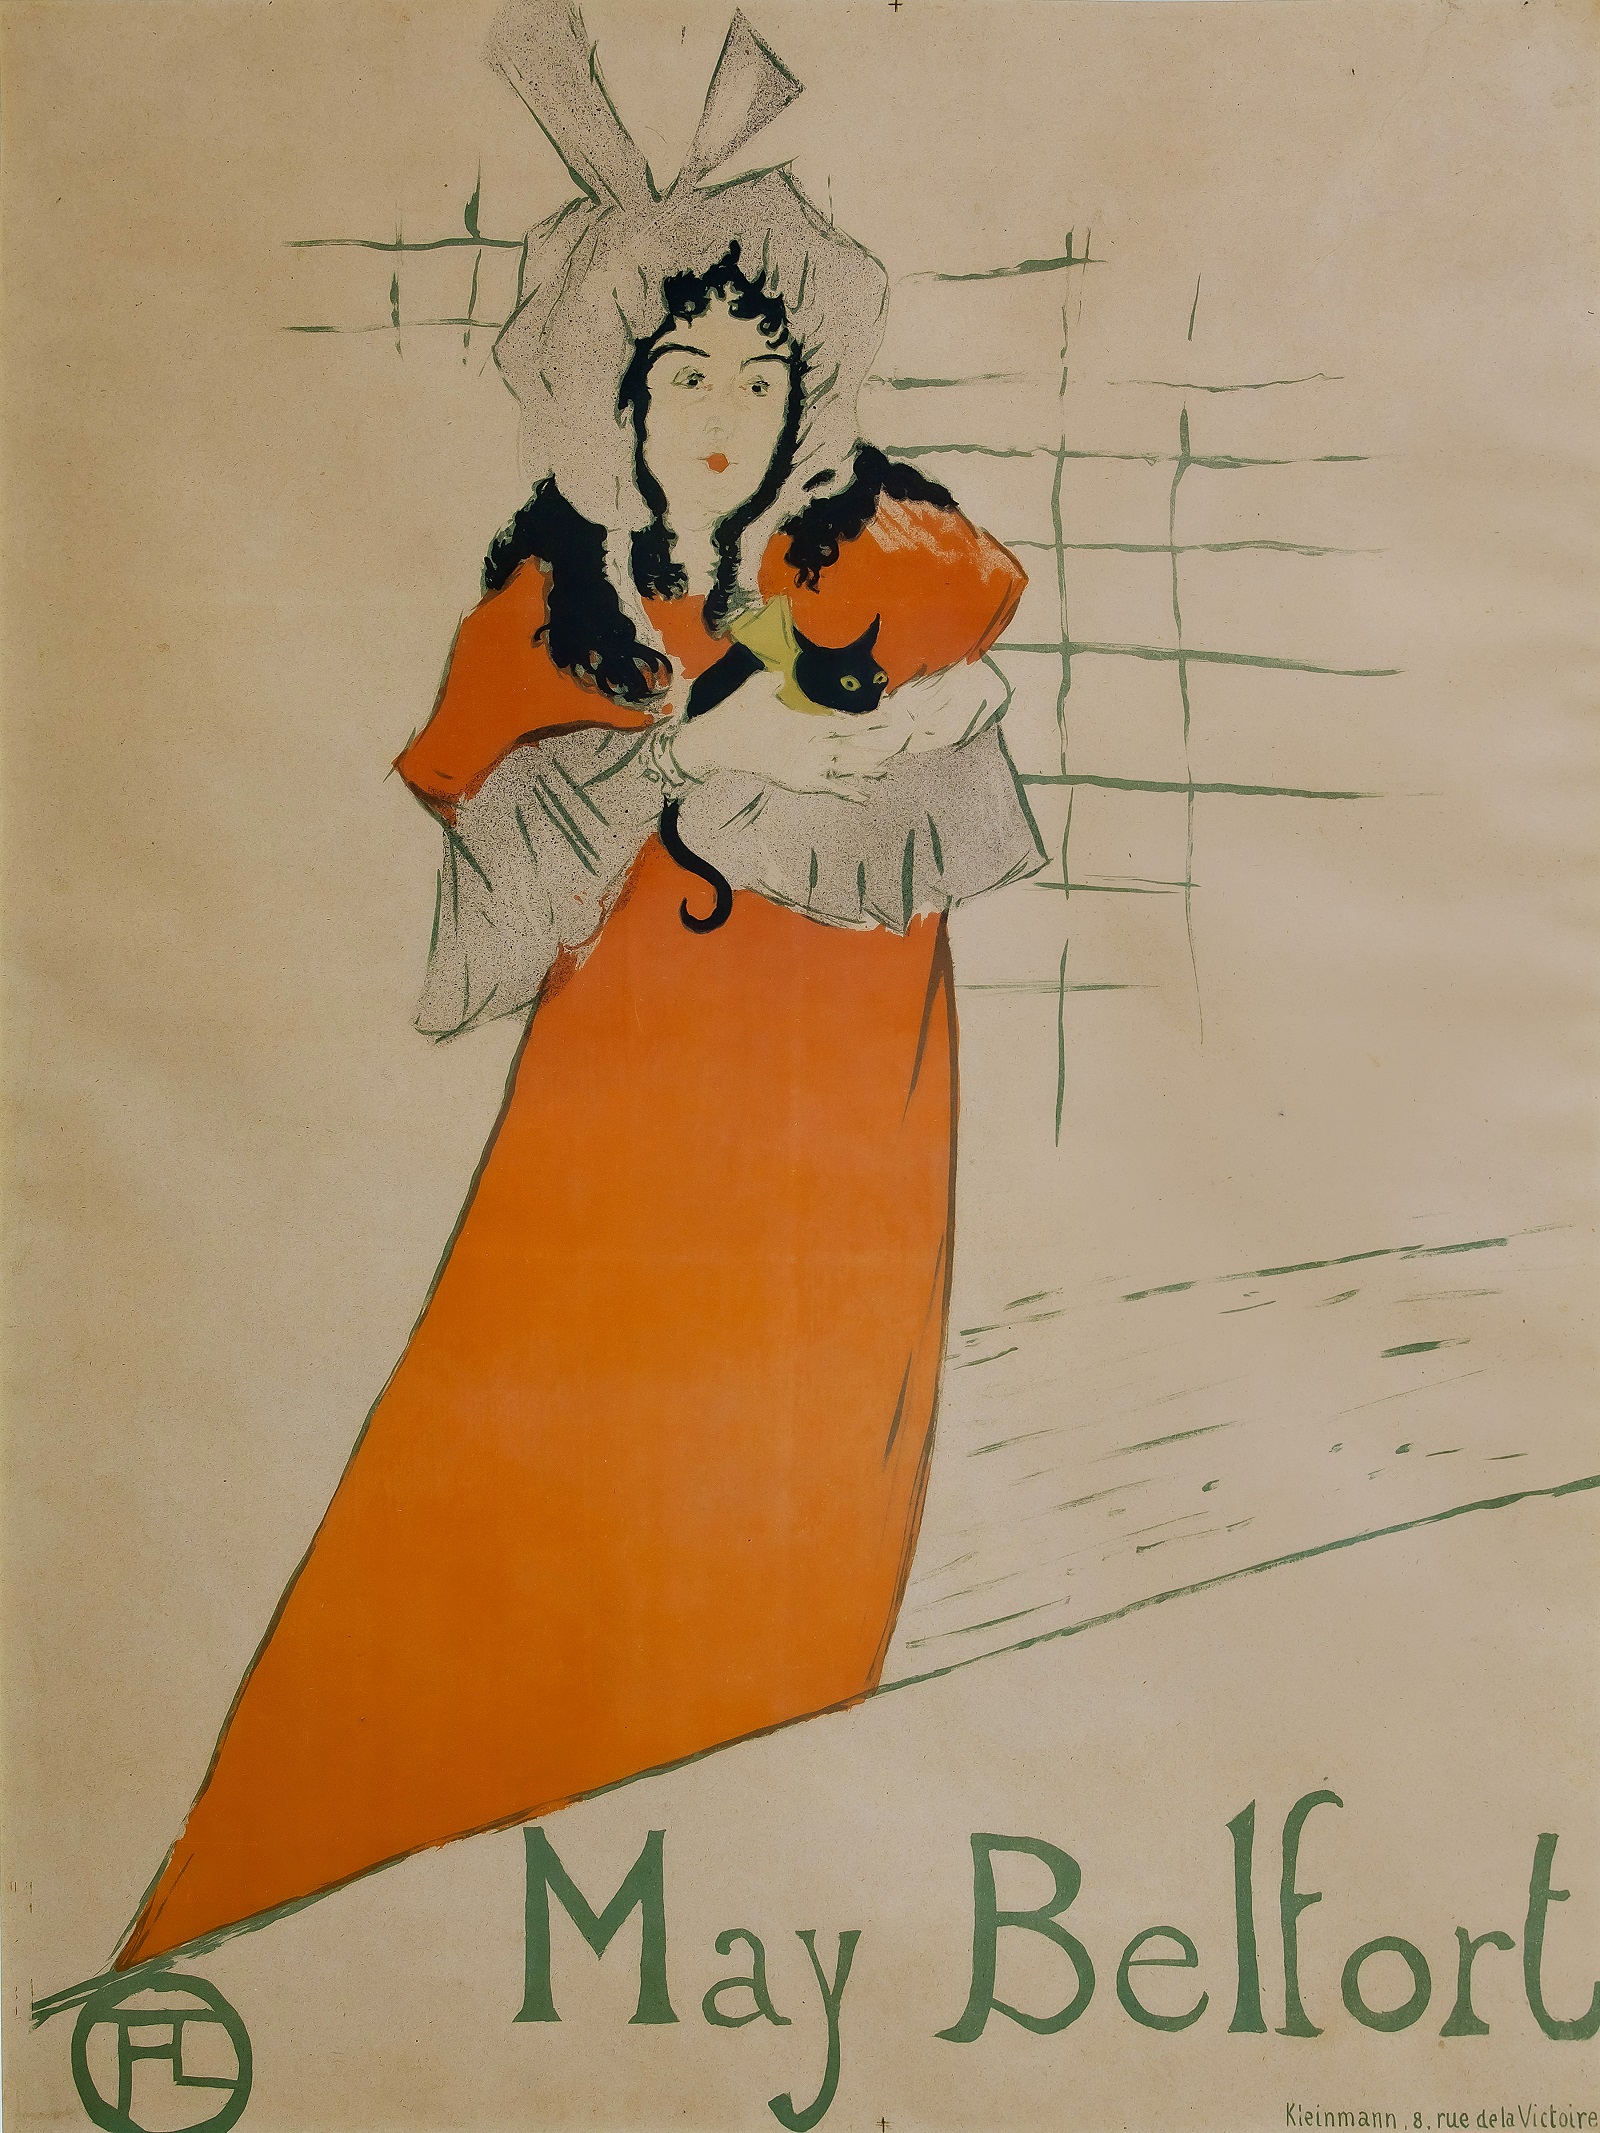 Henri de Toulouse-Lautrec’s May Belfort has a new home right outside of the art history classroom on the fifth floor of the Gabert Library. 